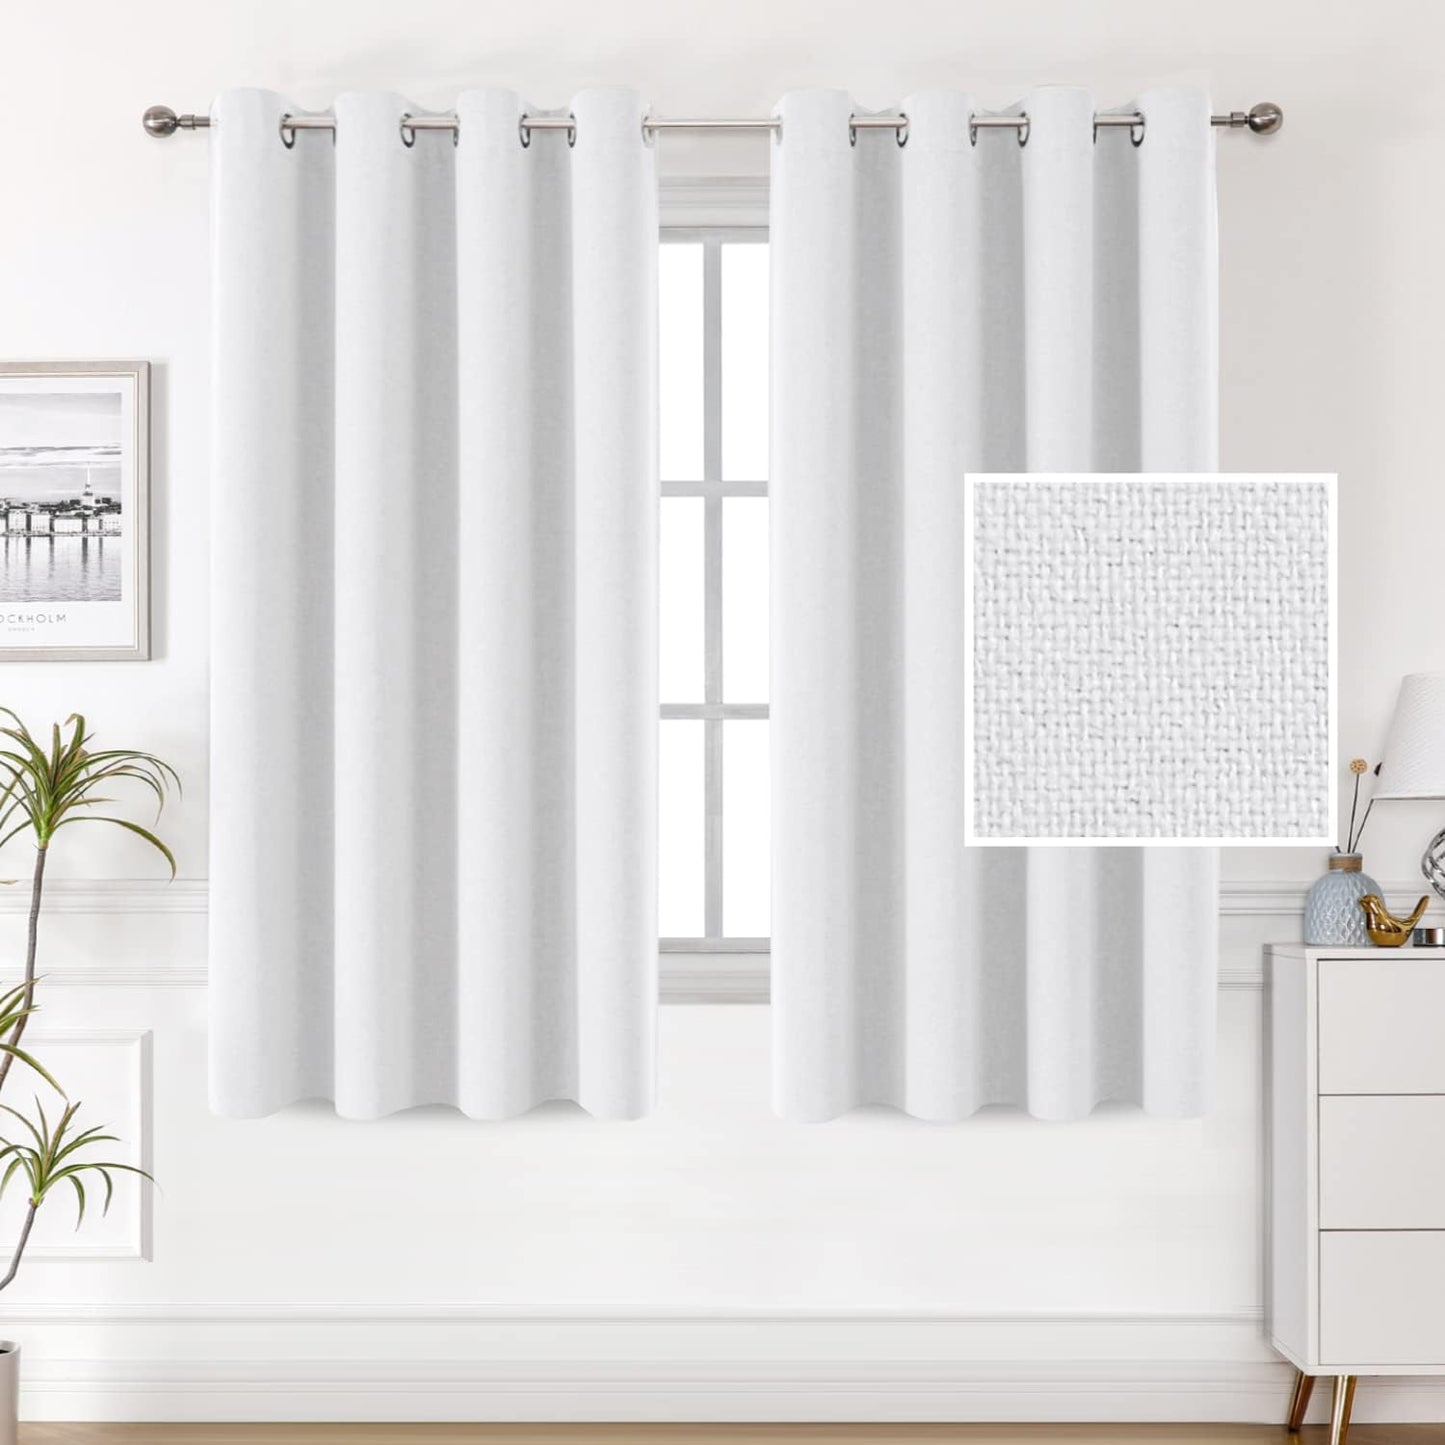 H.VERSAILTEX 100% Blackout Linen Look Curtains Thermal Insulated Curtains for Living Room Textured Burlap Drapes for Bedroom Grommet Linen Noise Blocking Curtains 42 X 84 Inch, 2 Panels - Sage  H.VERSAILTEX White 52"W X 54"L 